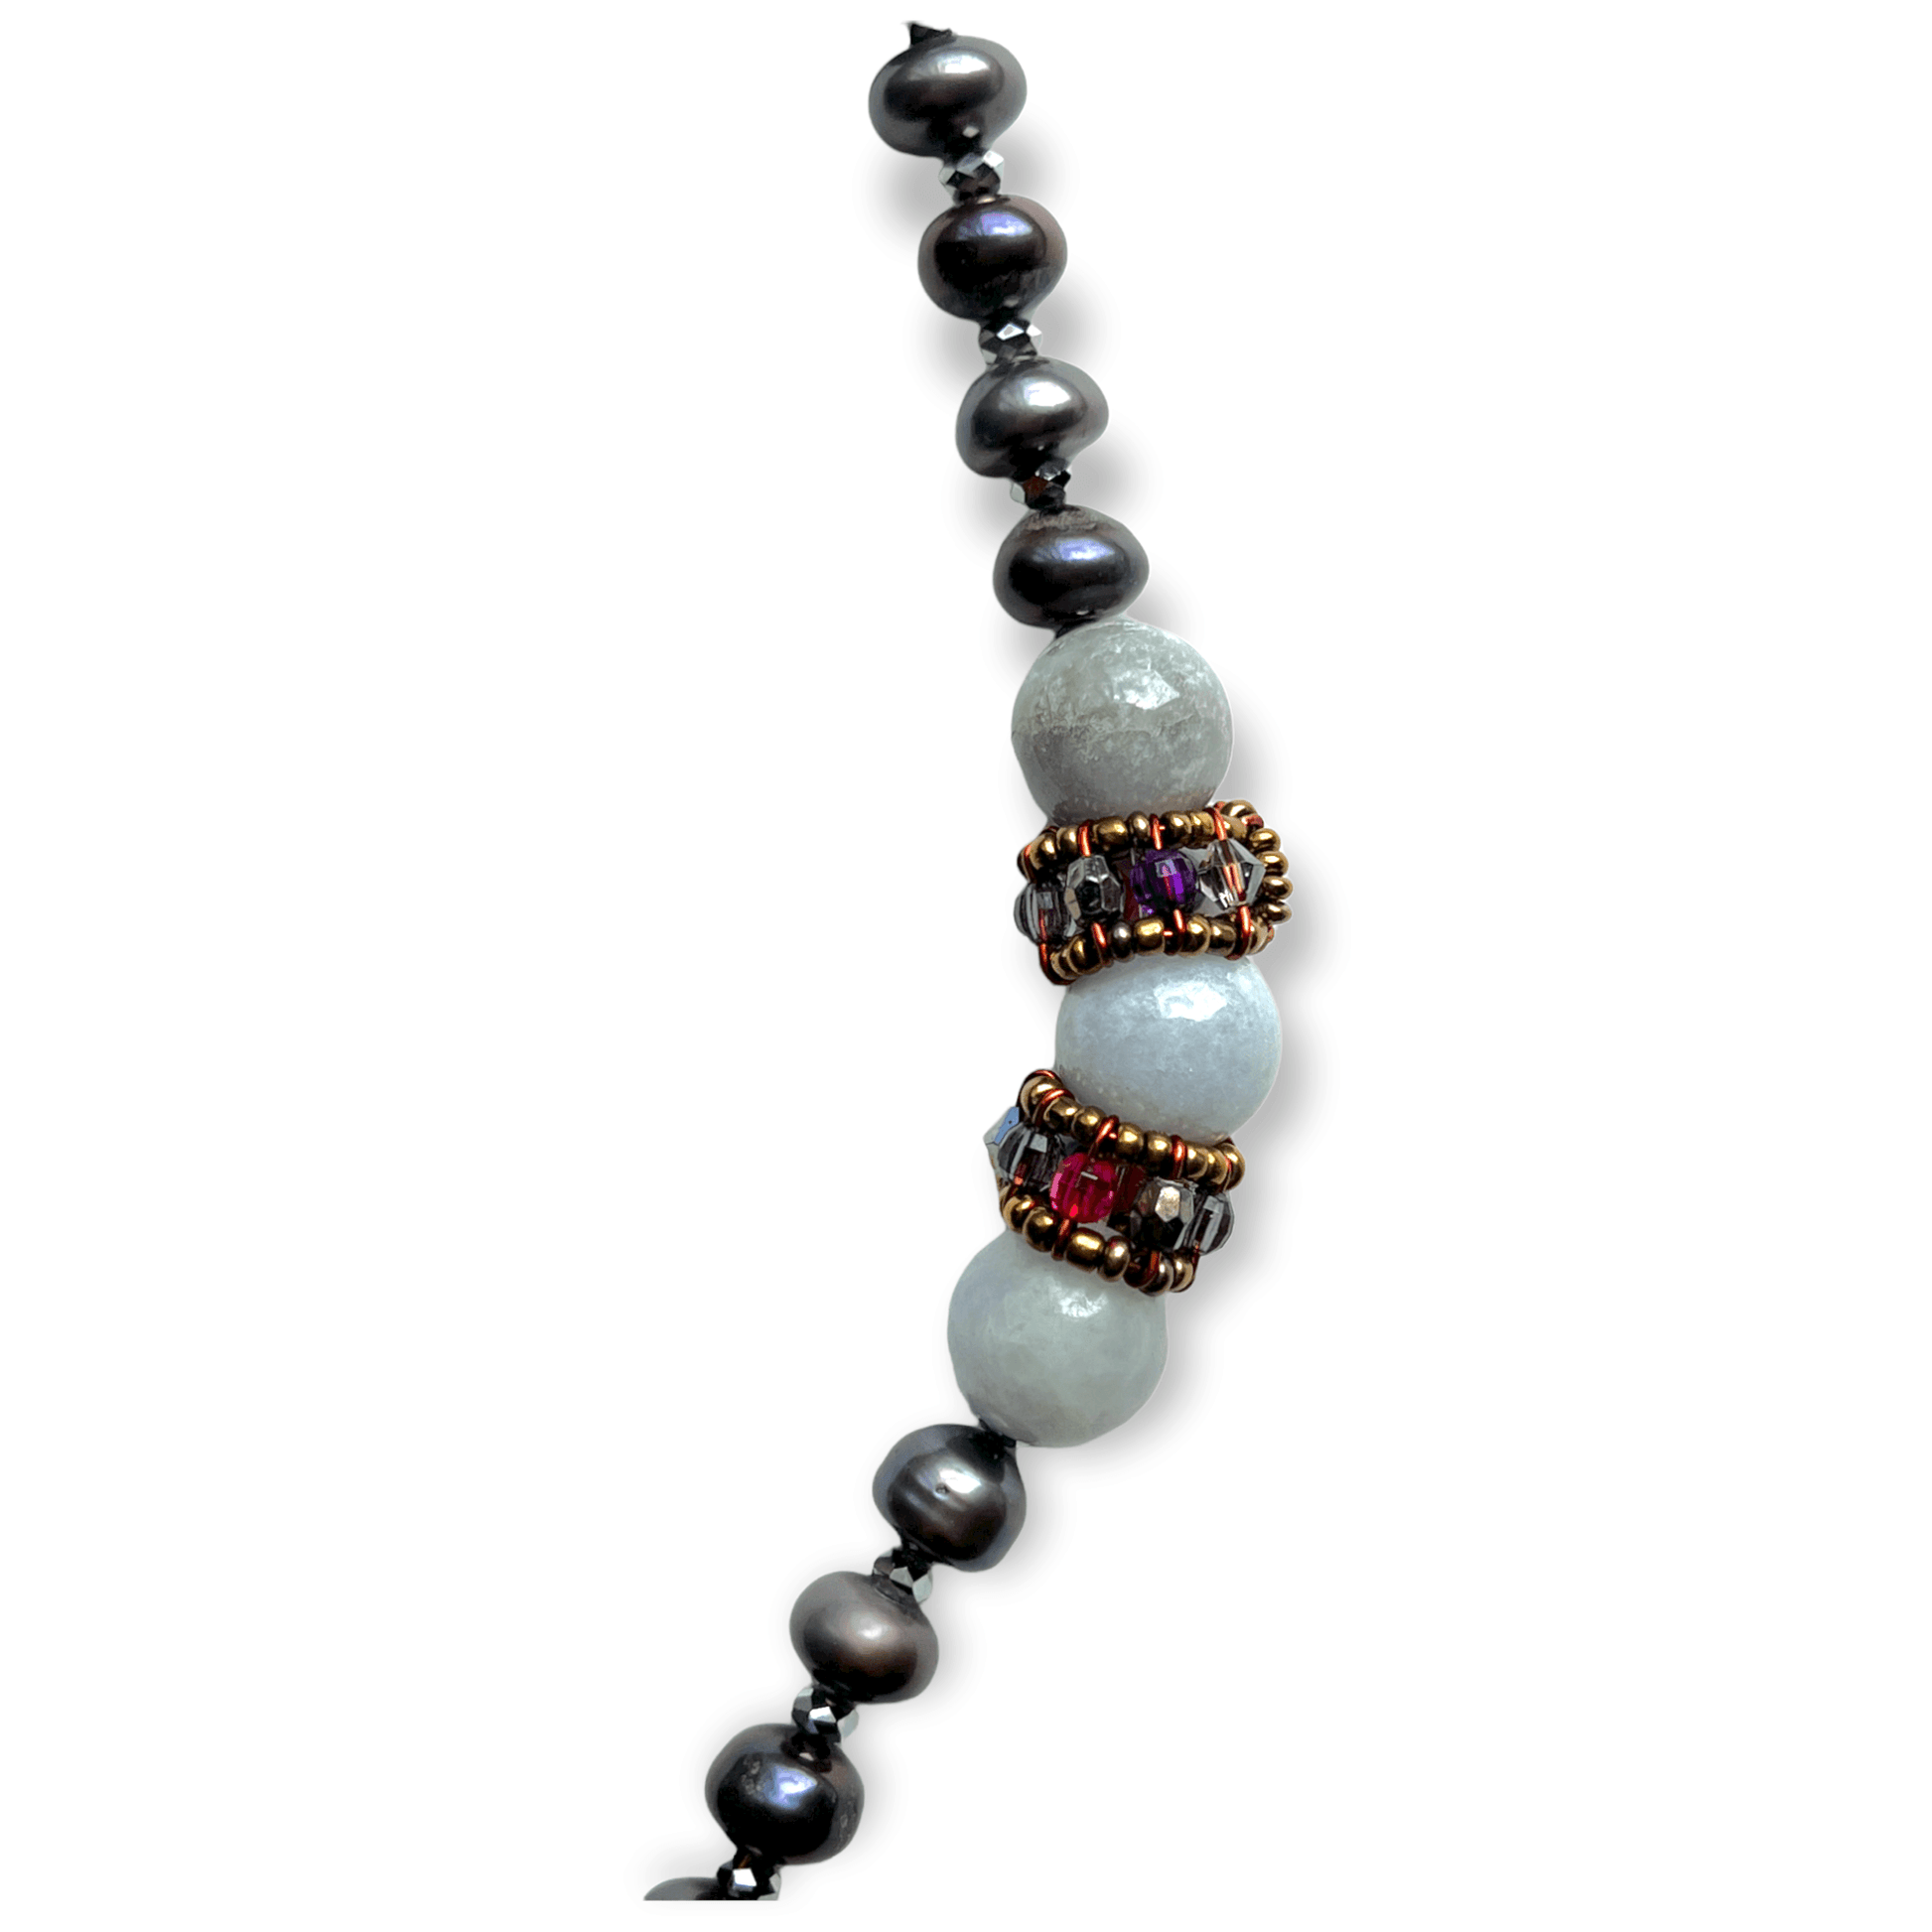 Jade and pearl beaded statement necklace with a jadite disk - Sundara Joon